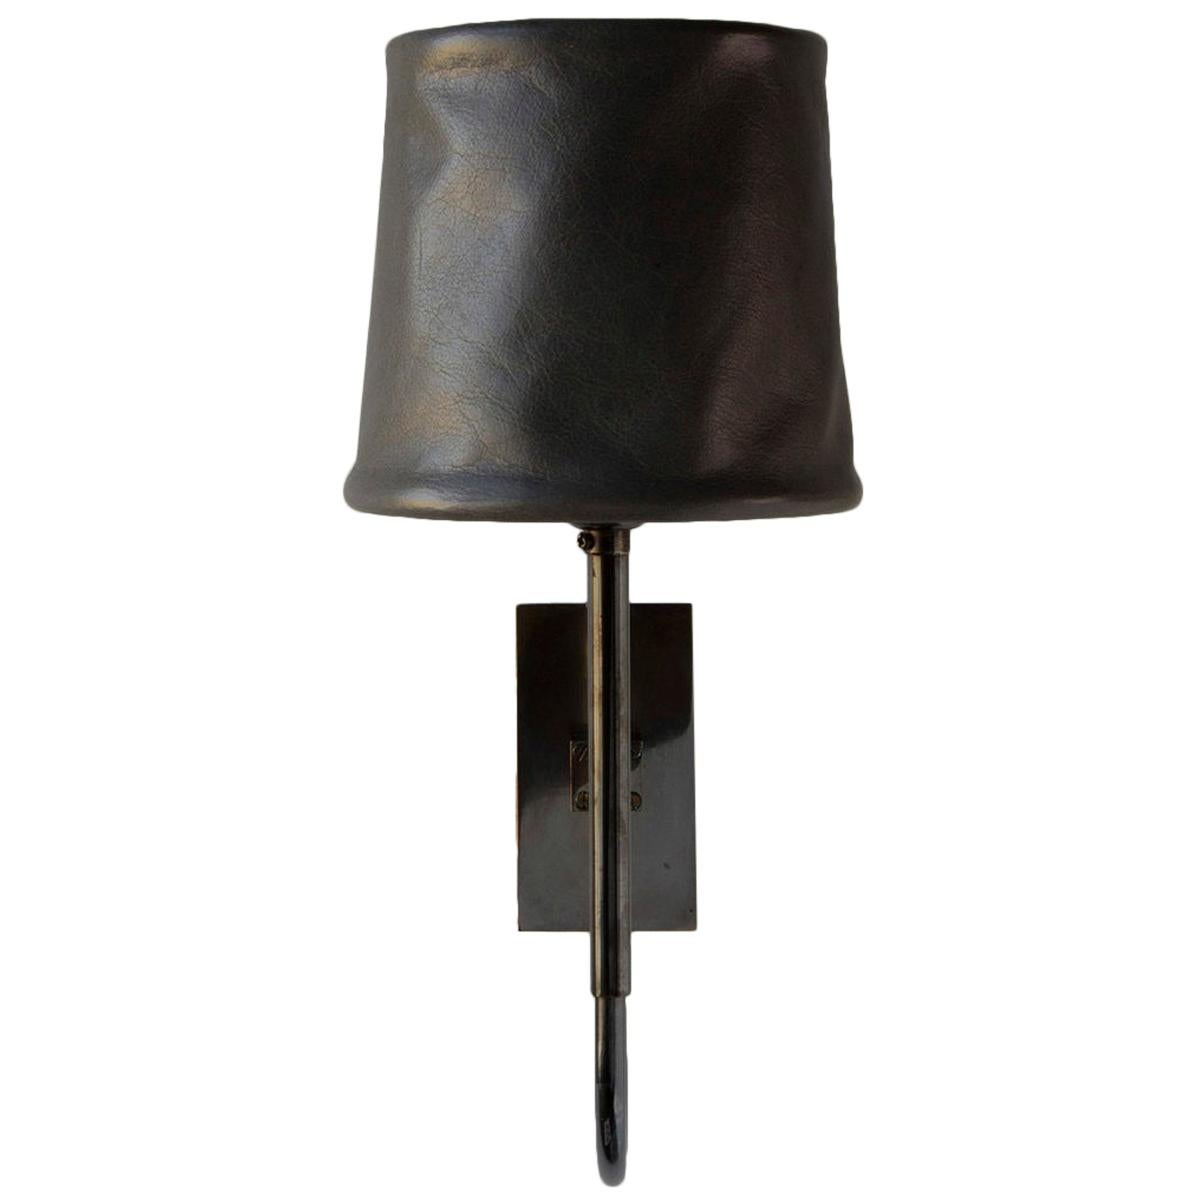 Series01 Upright Sconce, Dark Patinated Brass, Lead Gray Leather Shade For Sale